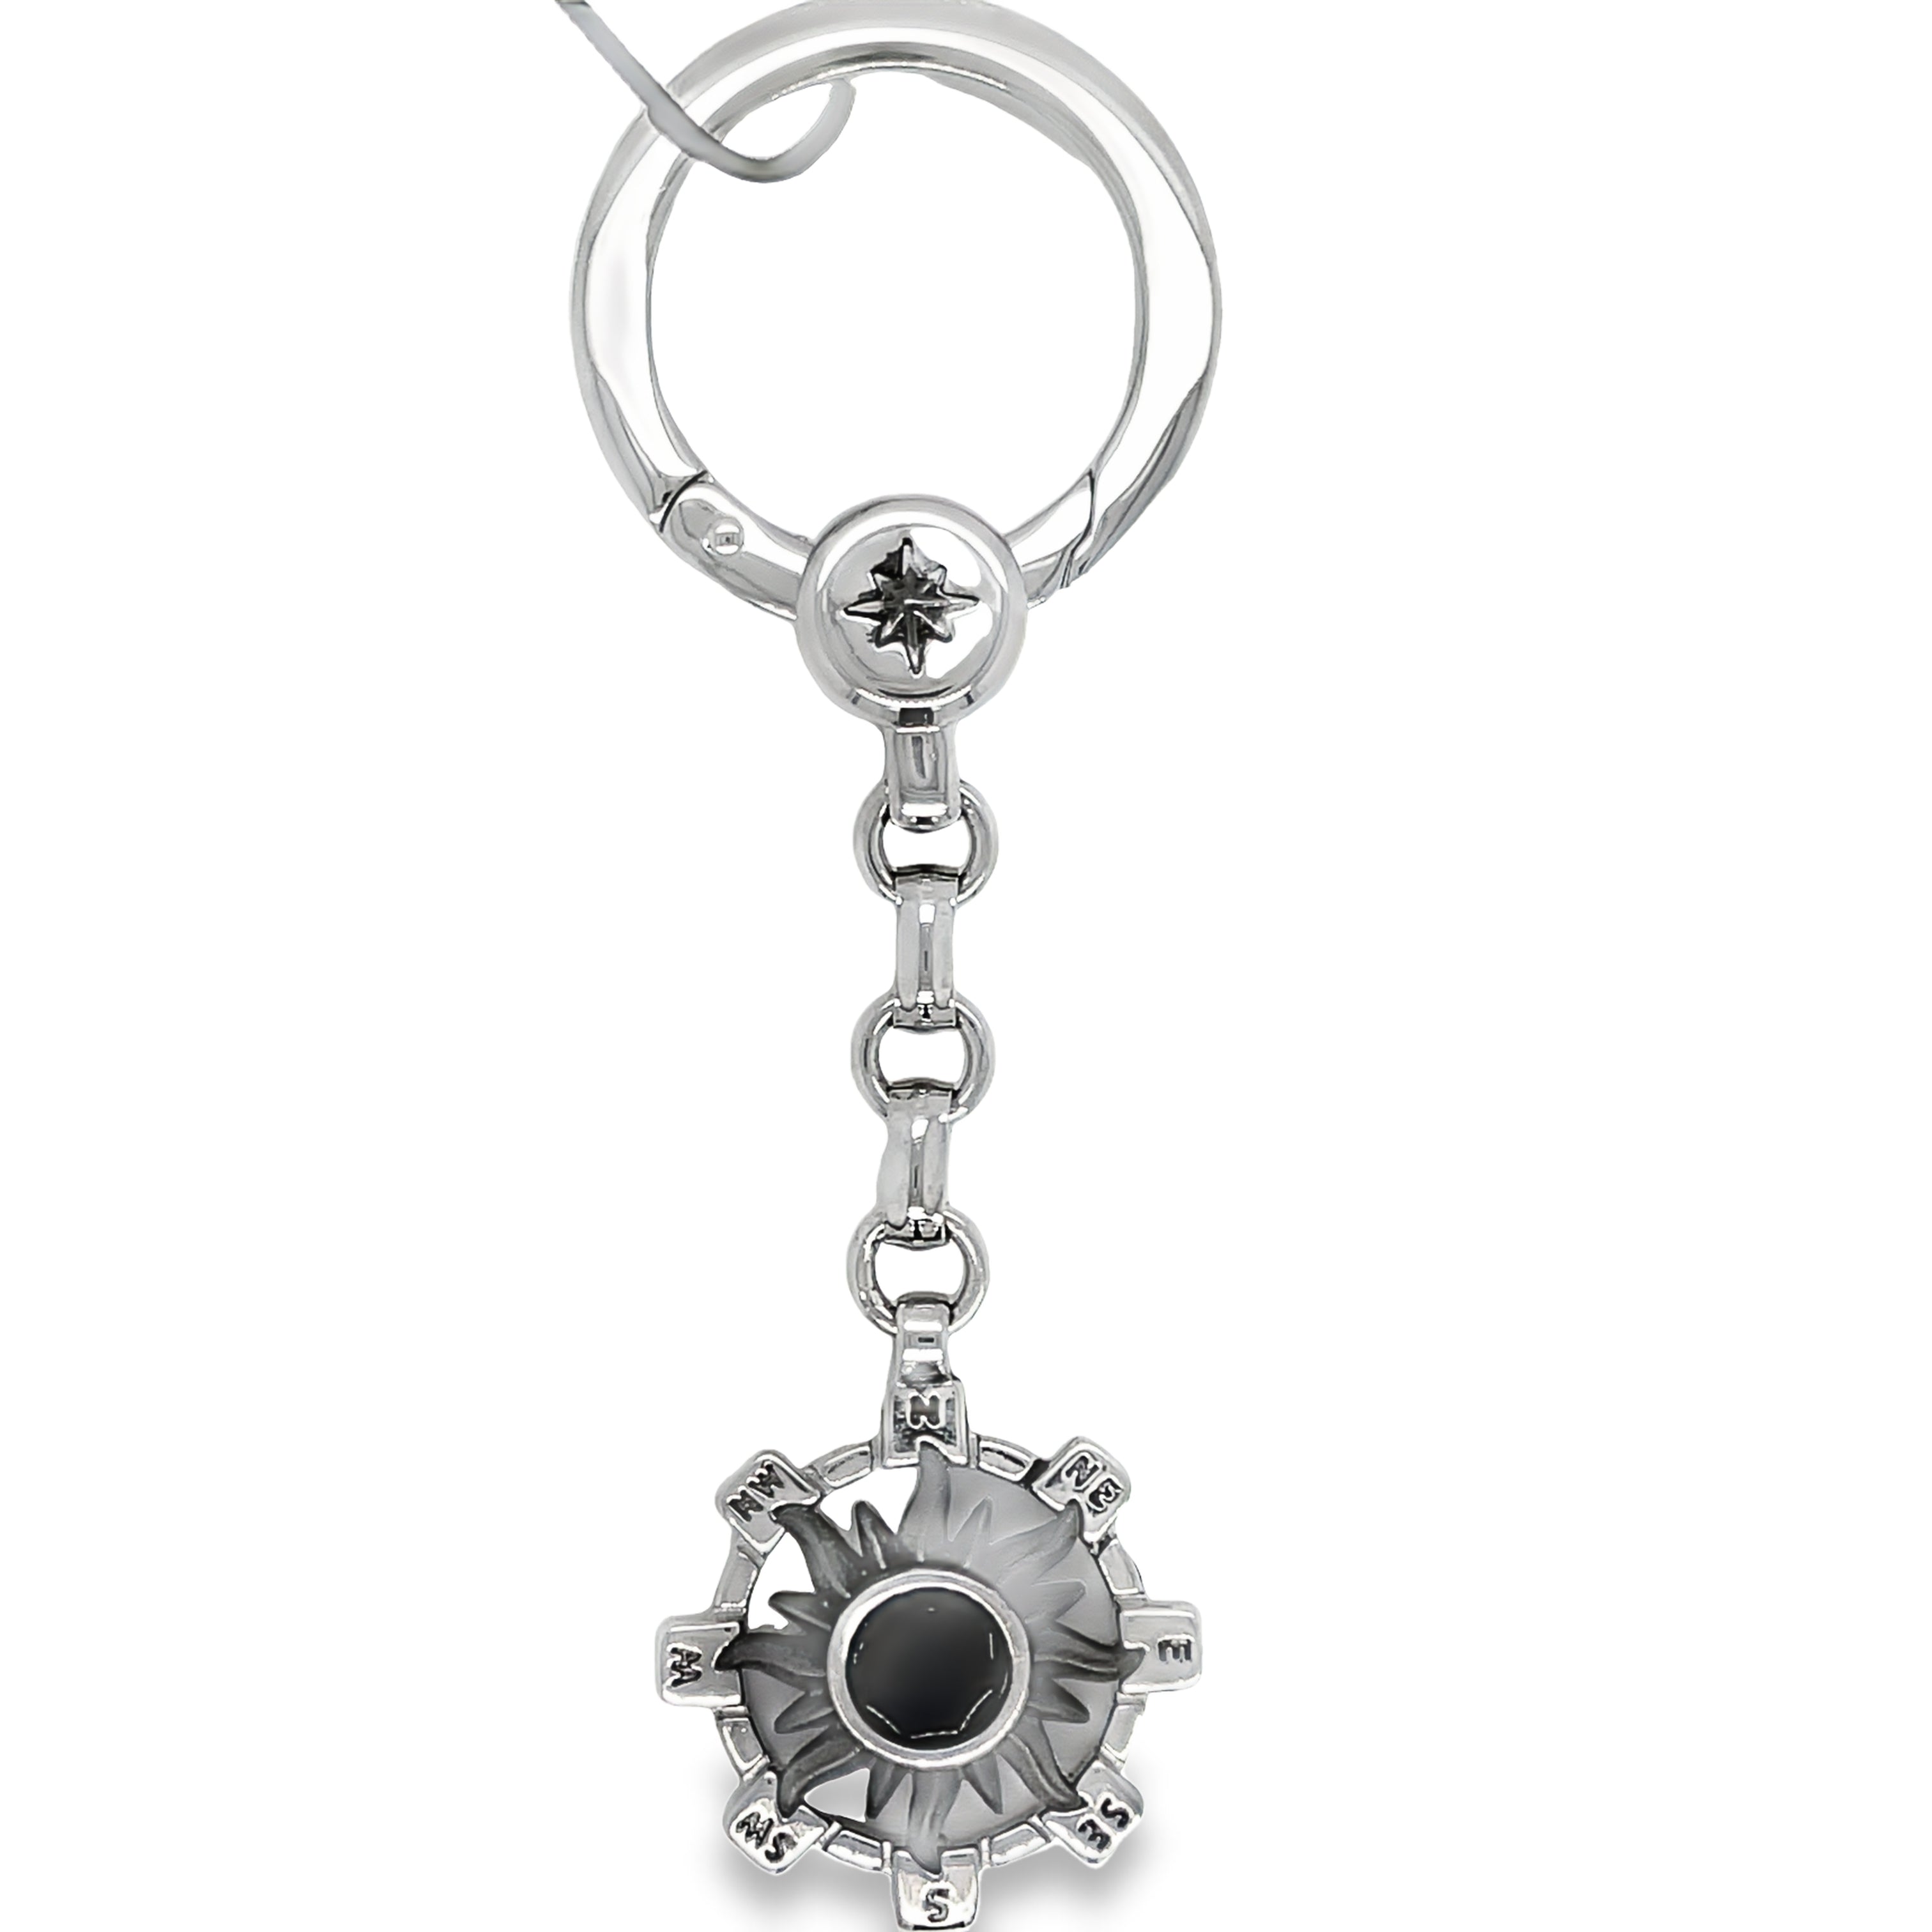 This Zancan key chain is made in Italy and crafted from high-quality stainless steel, ensuring durability and style. With its sleek design and superior material, it will elevate your everyday carry and keep your keys organized. A must-have for any discerning keychain collector.